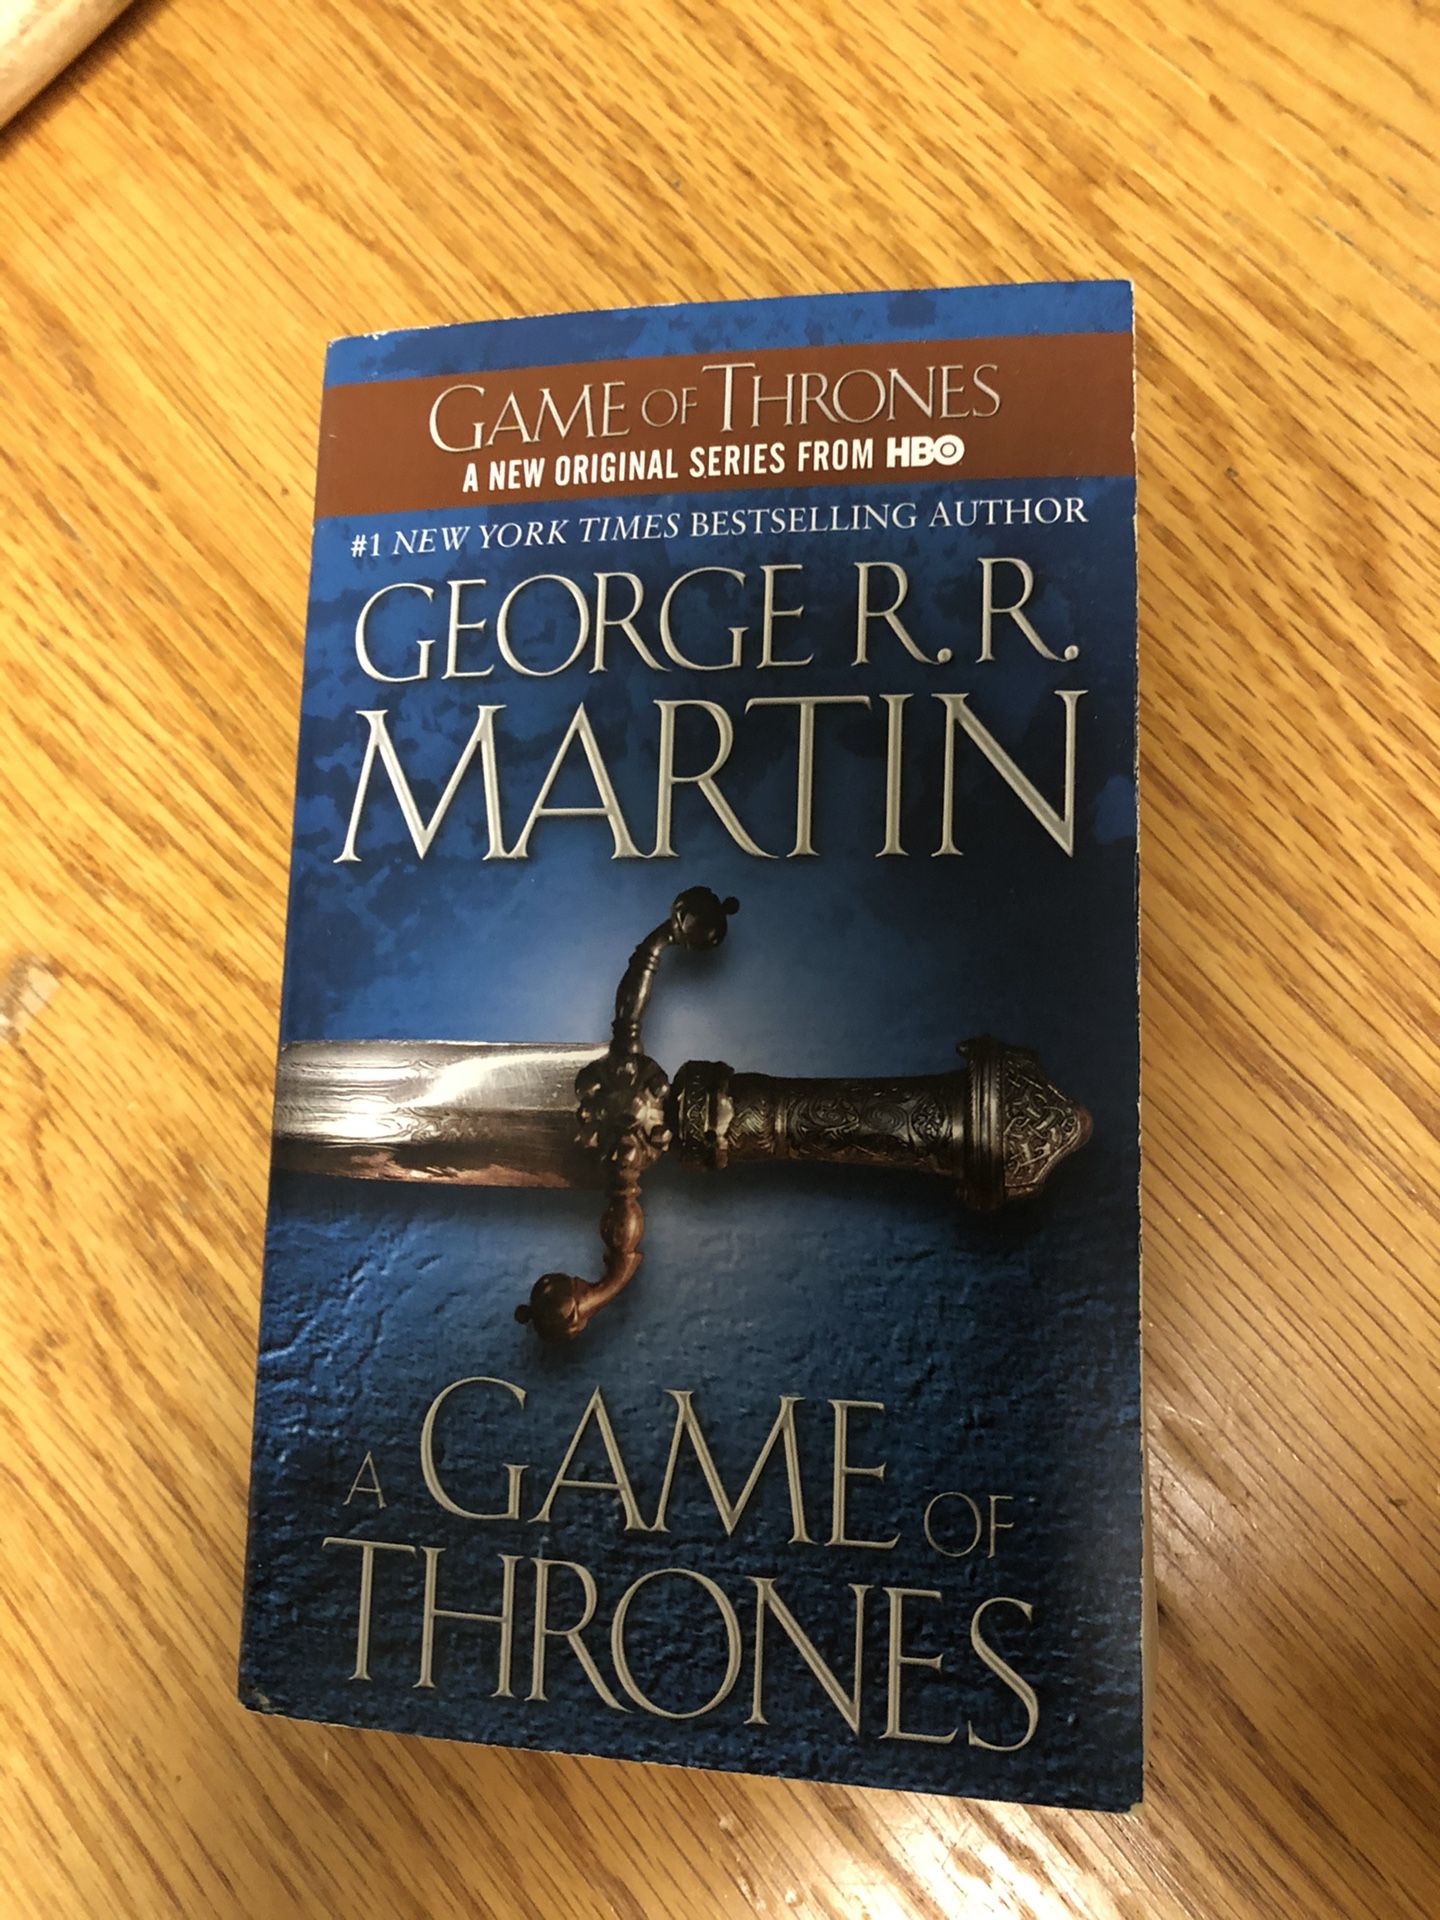 FREE Game of Thrones books